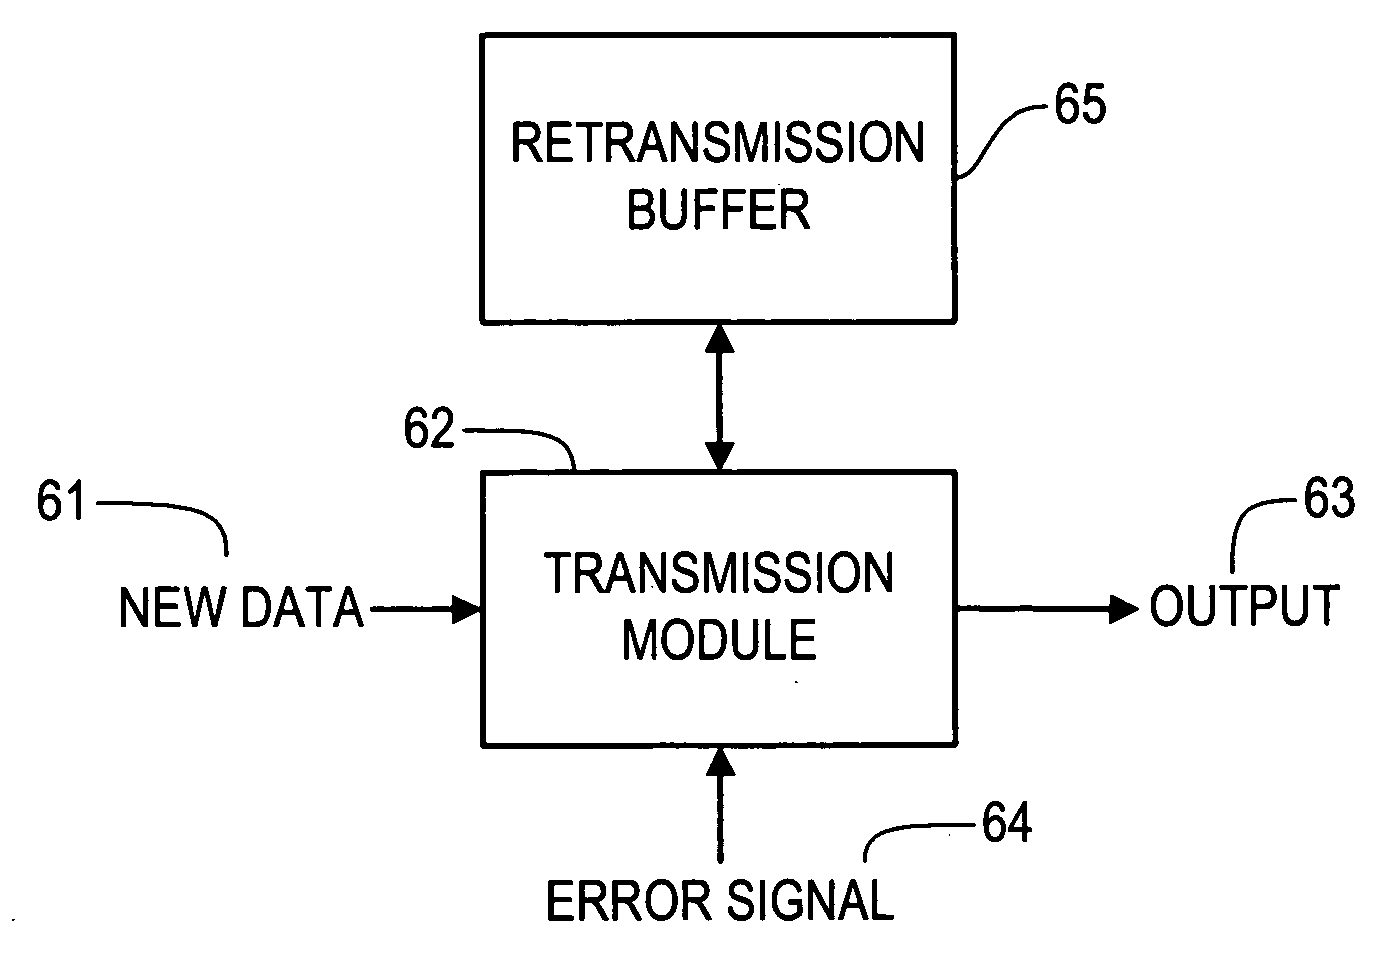 Inter-layer communication of receipt confirmation for releasing retransmission buffer contents